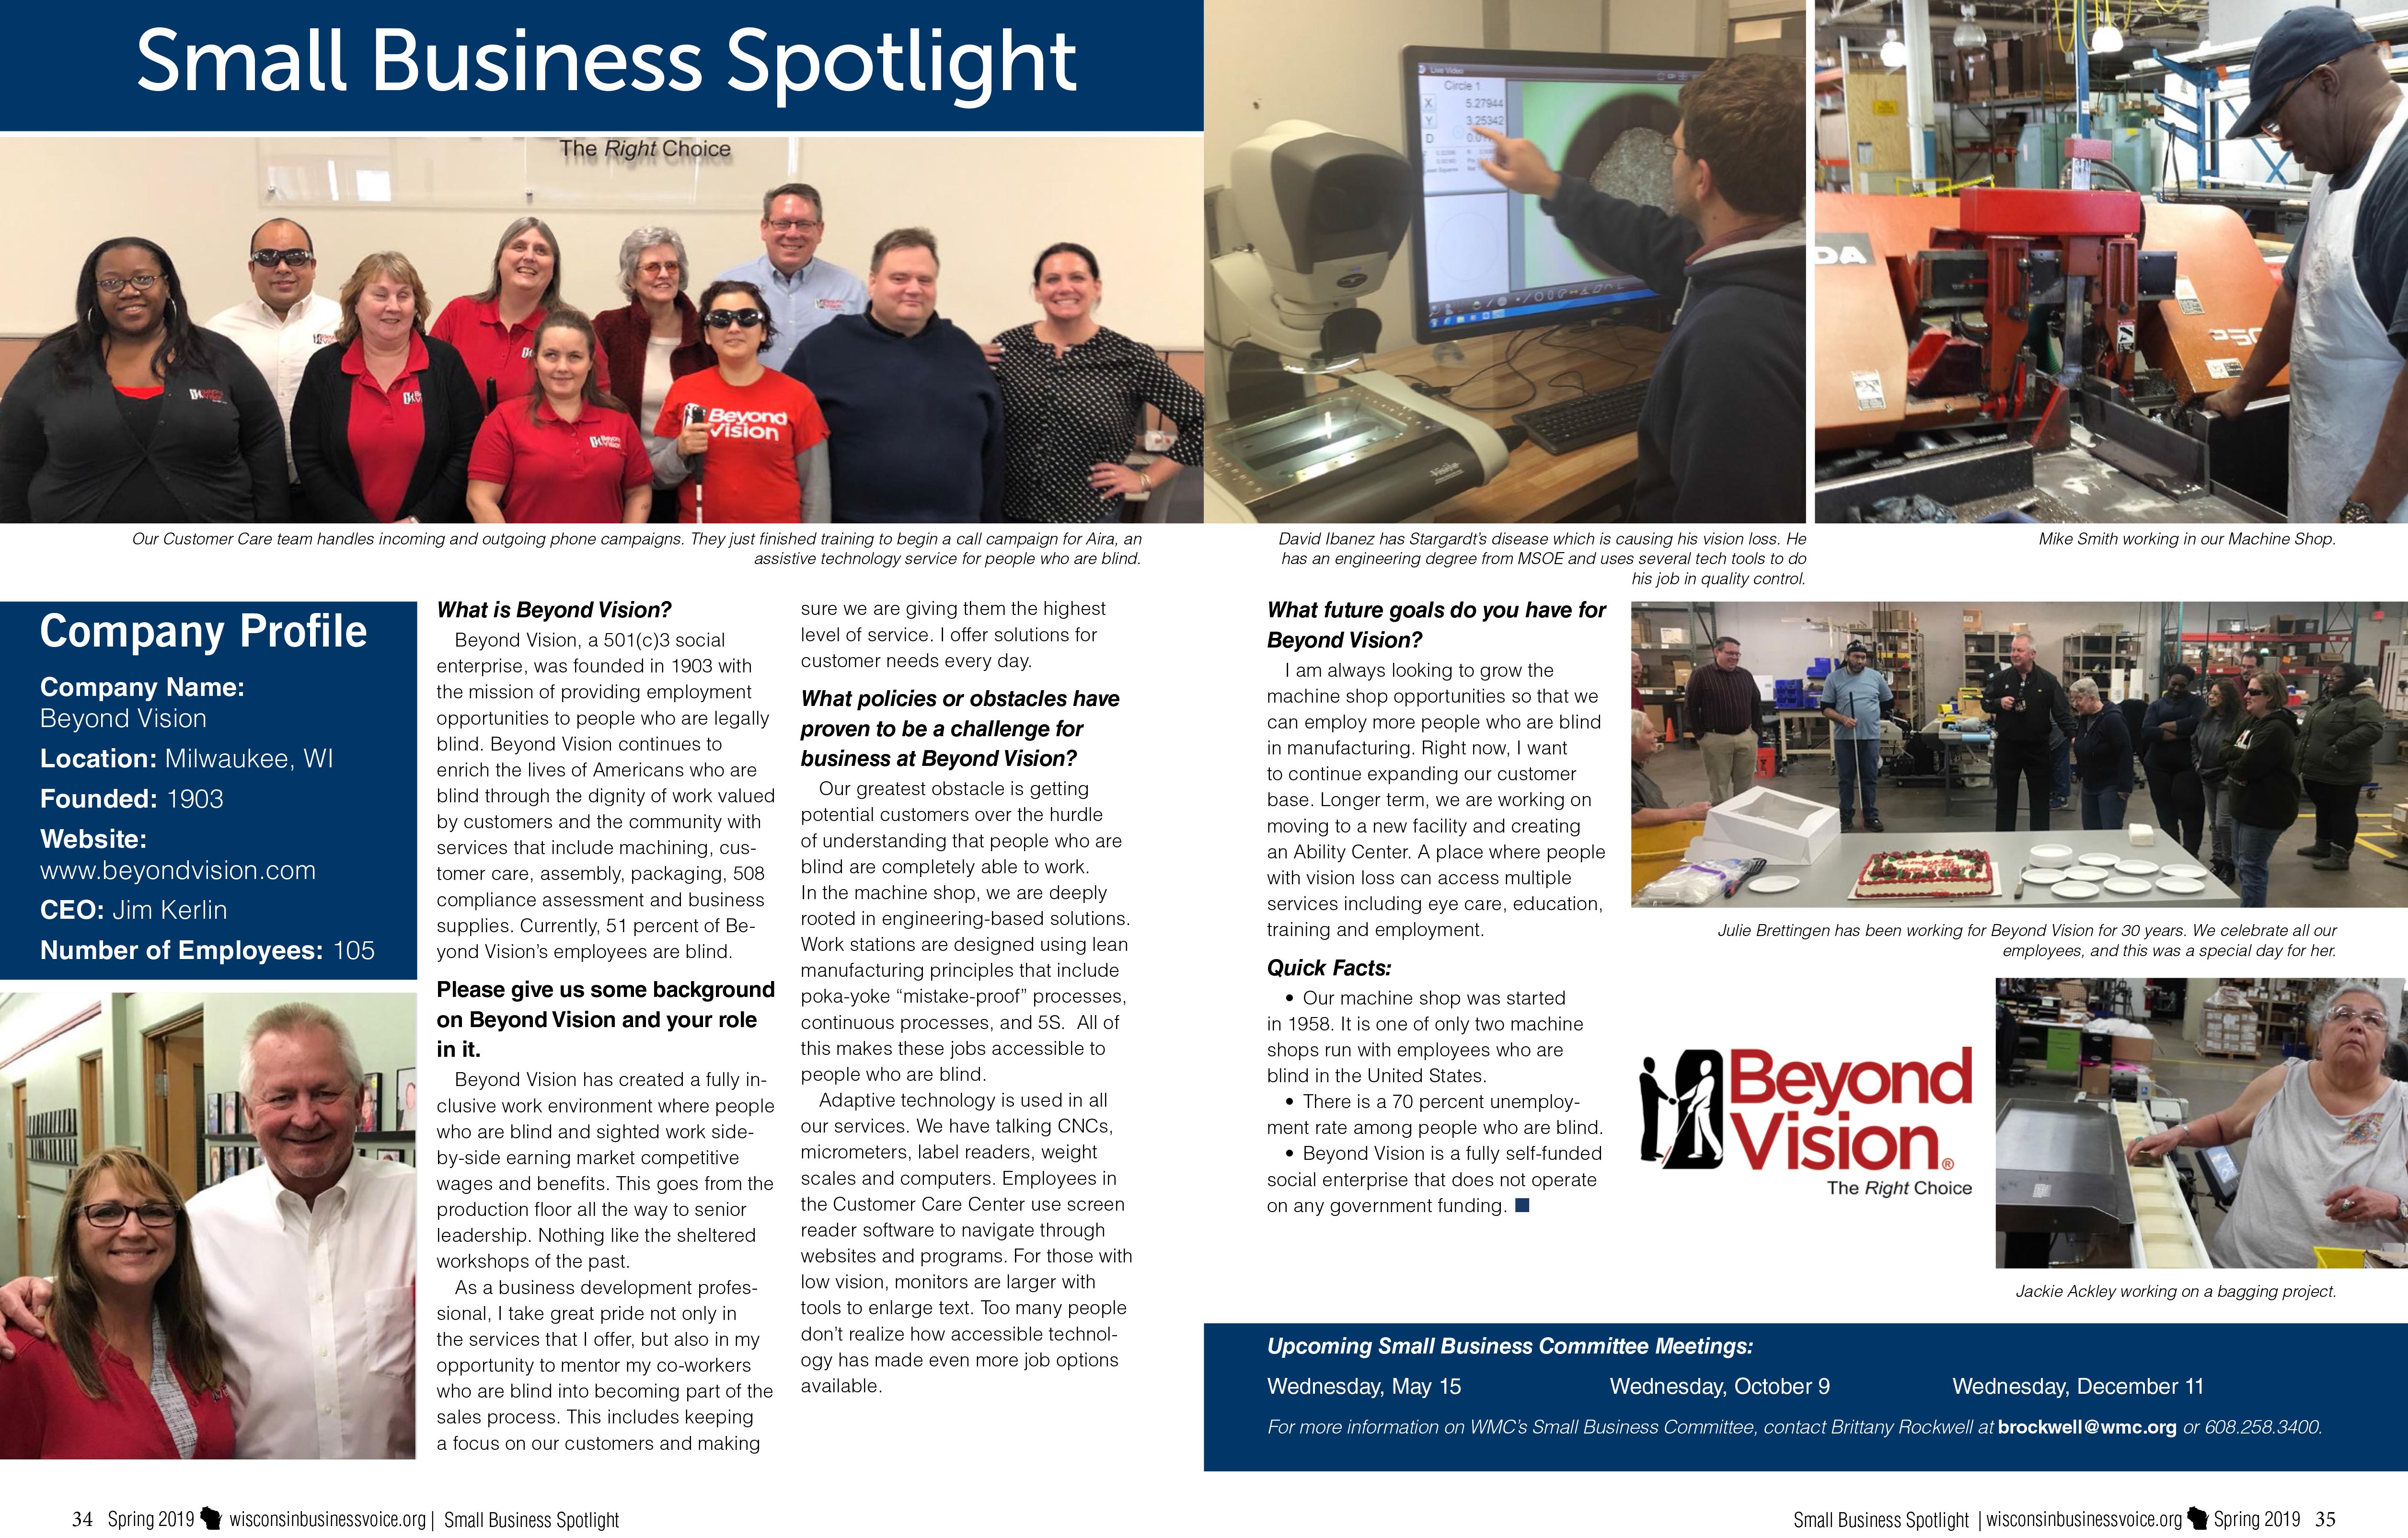 Image of article. Accessible version through link https://www.beyondvision.com/about/news/wisconsin-business-voice-spring-2019/wisconsin-business-voice-spring-2019-accessible-text-version/